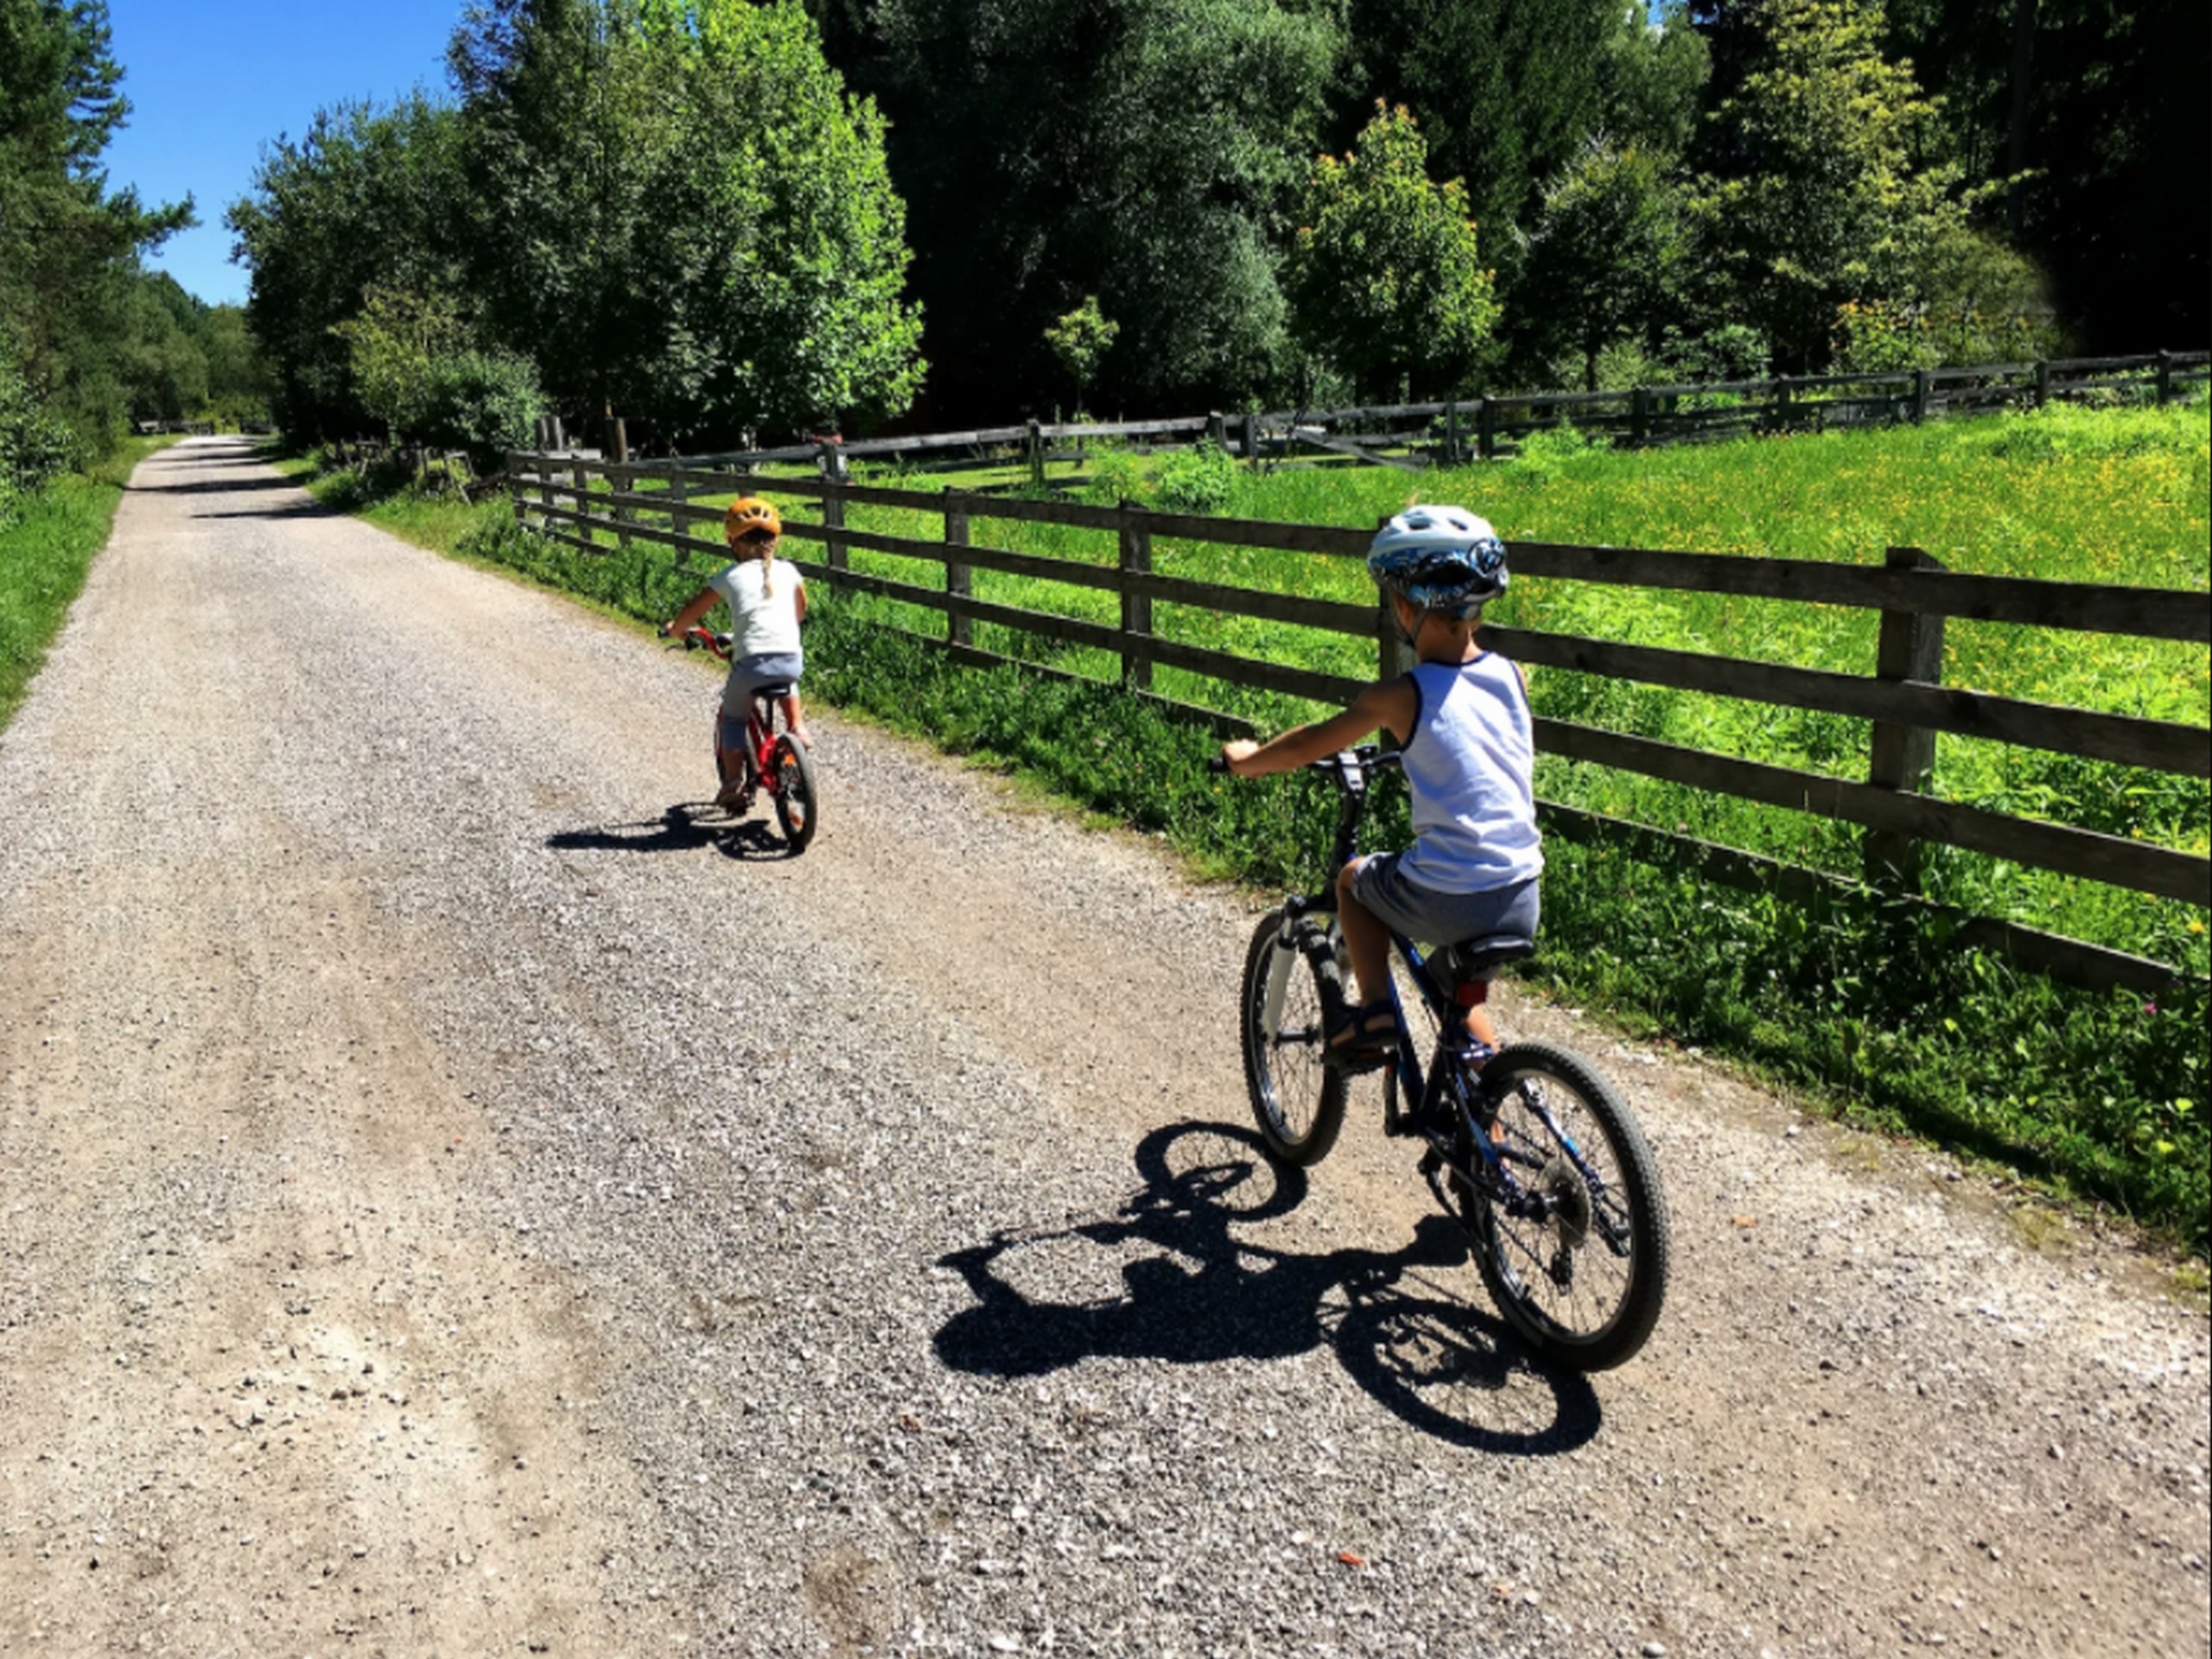 Family cycling on one of the biking paths in Slovenia